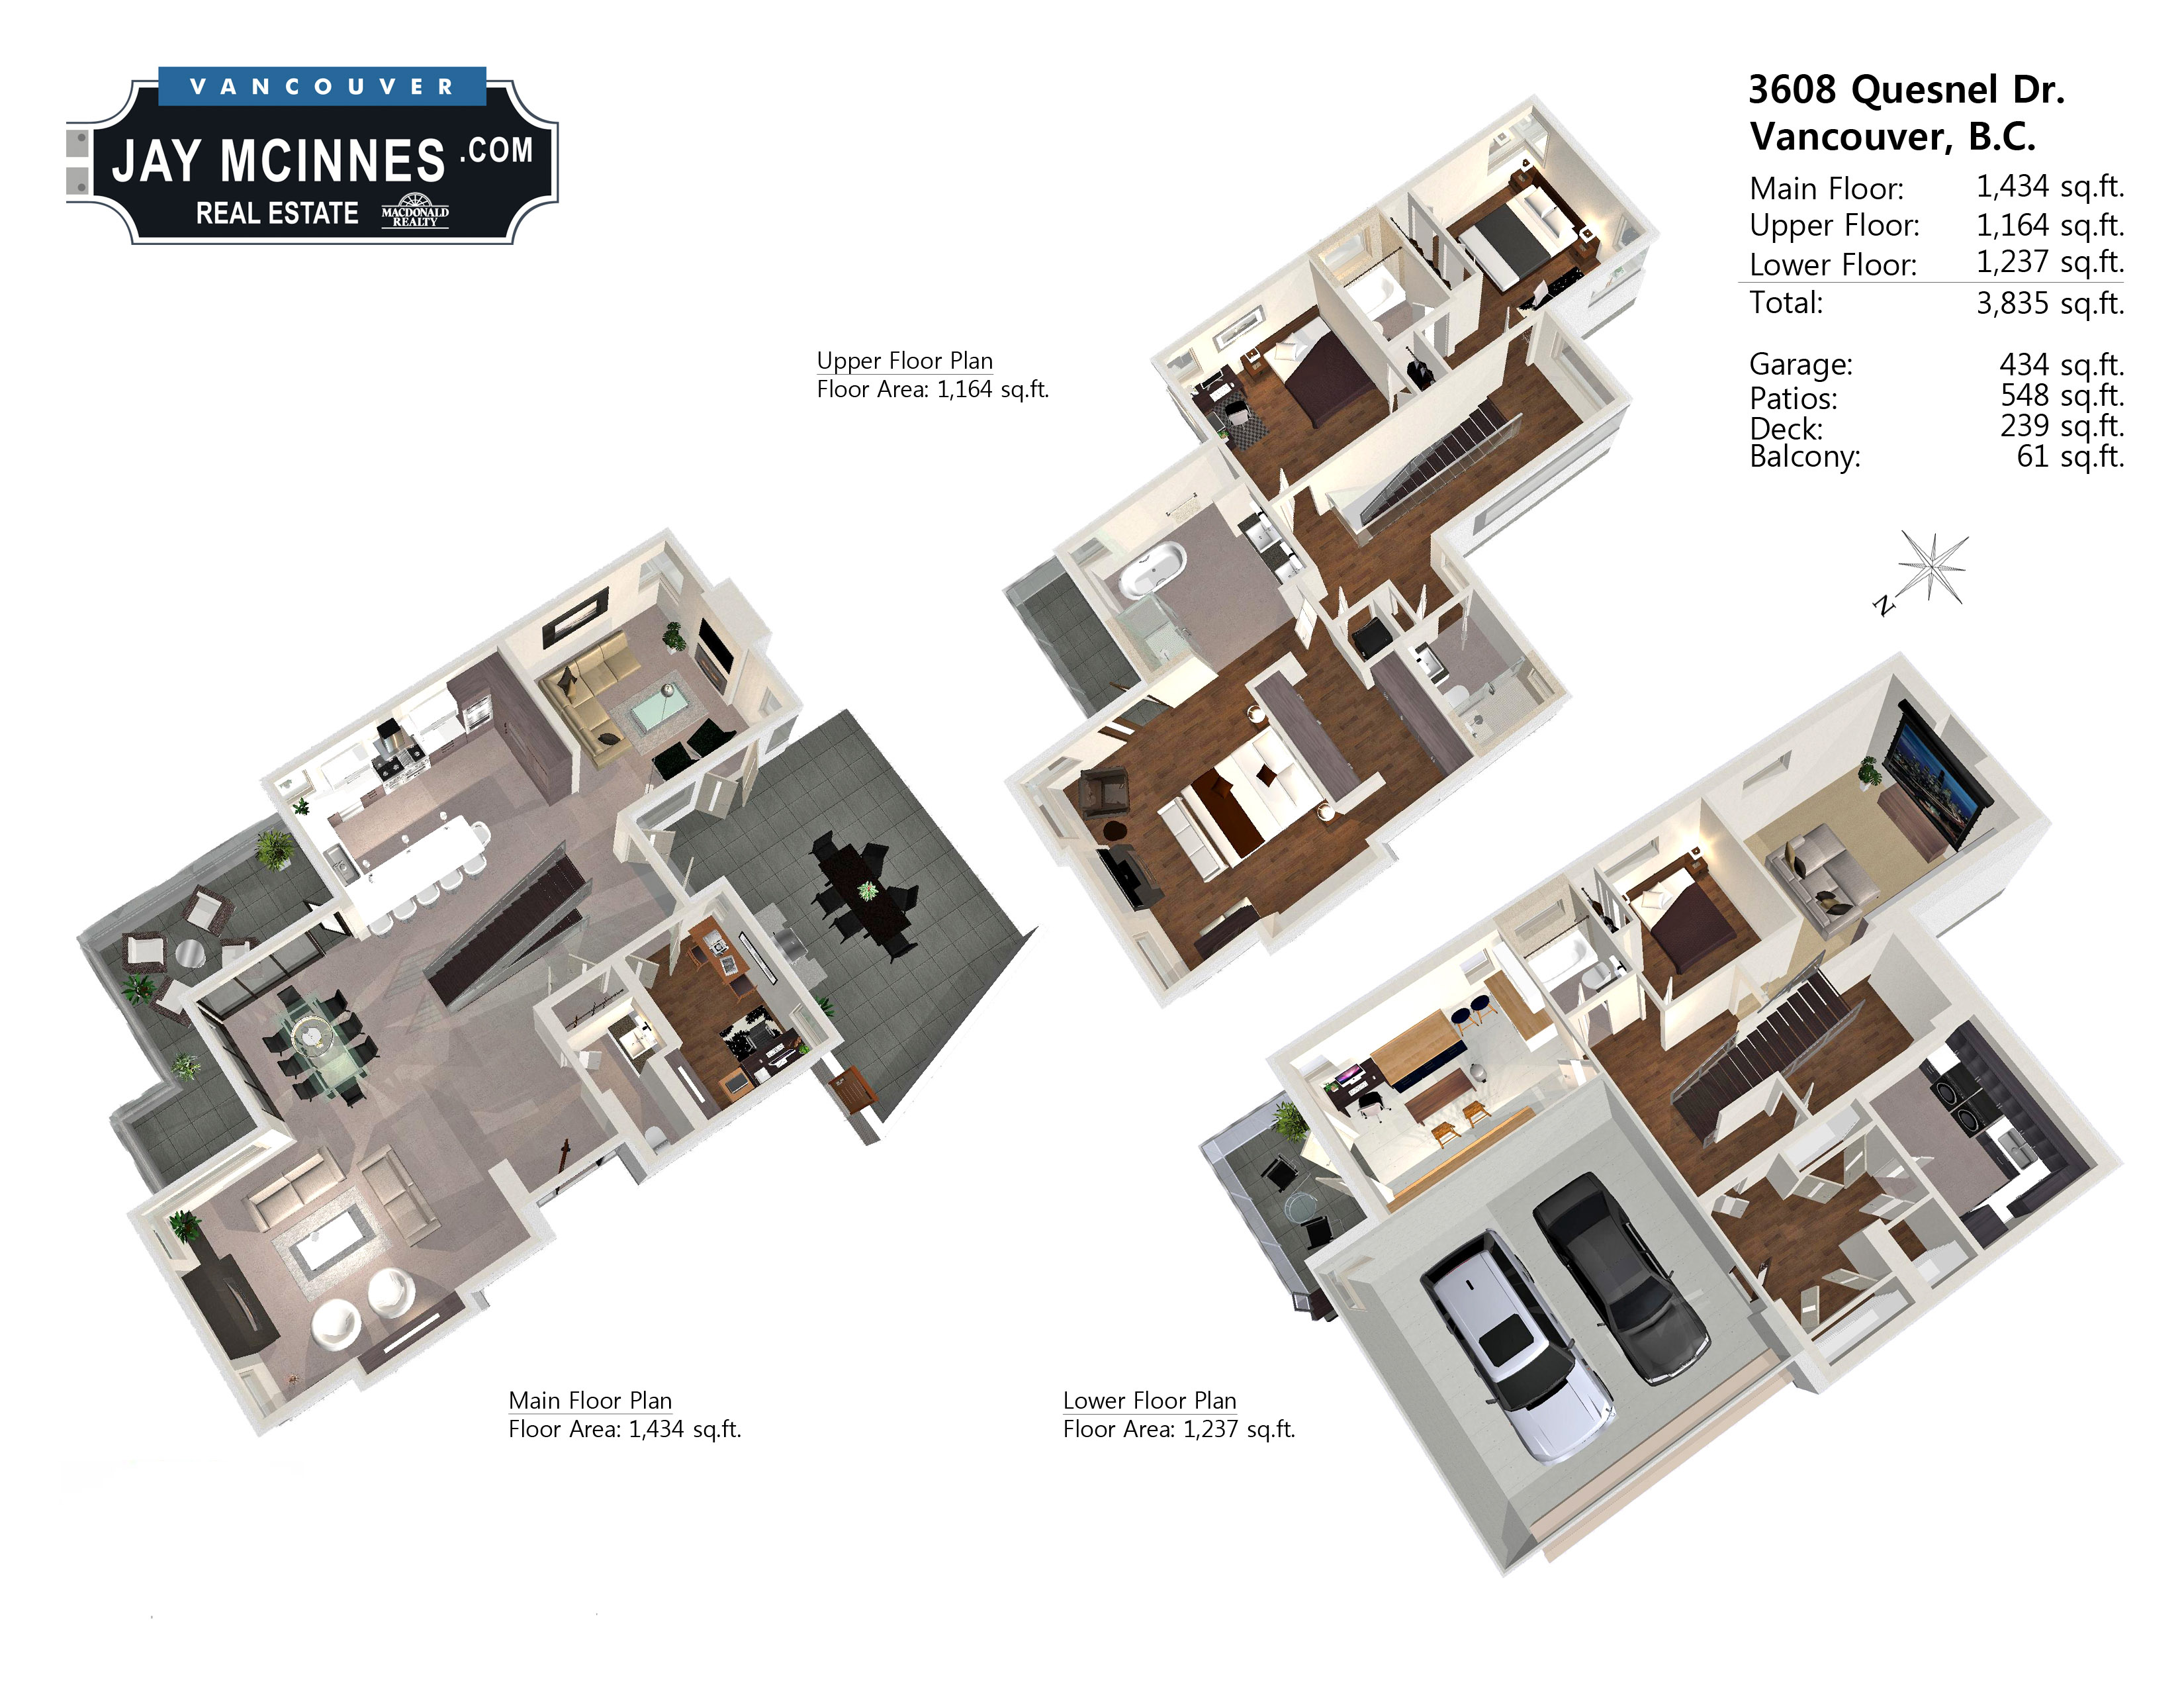  Draw  3d  house  plans  online  free        